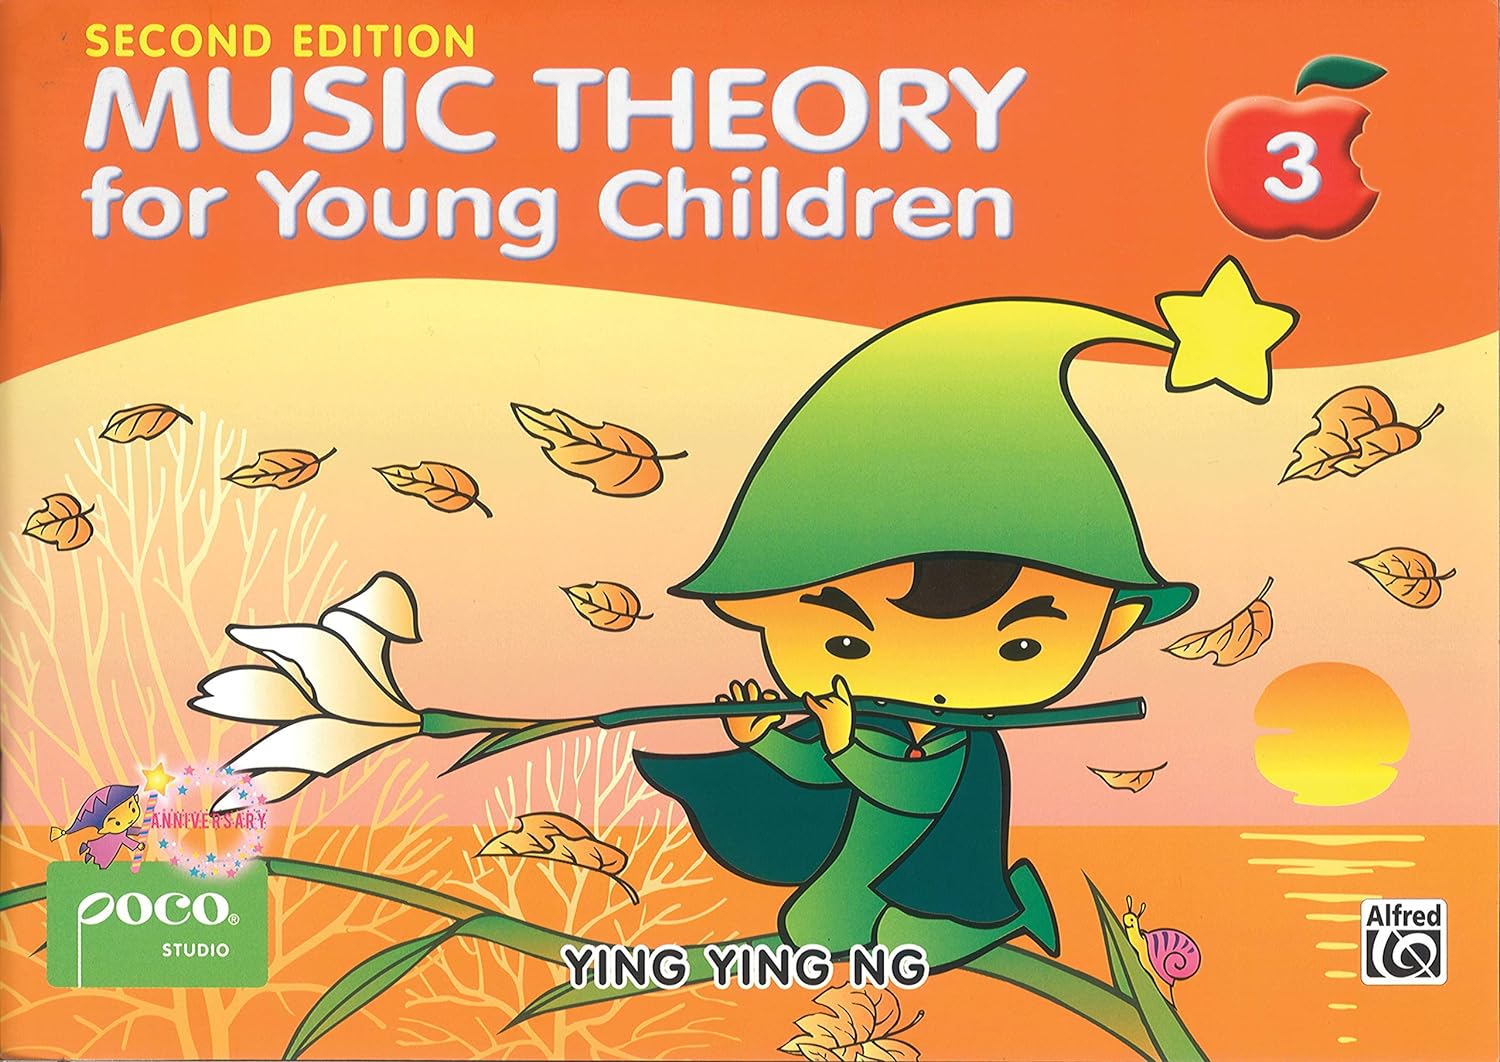 Poco Music Theory for Young Children 3 Piano Traders